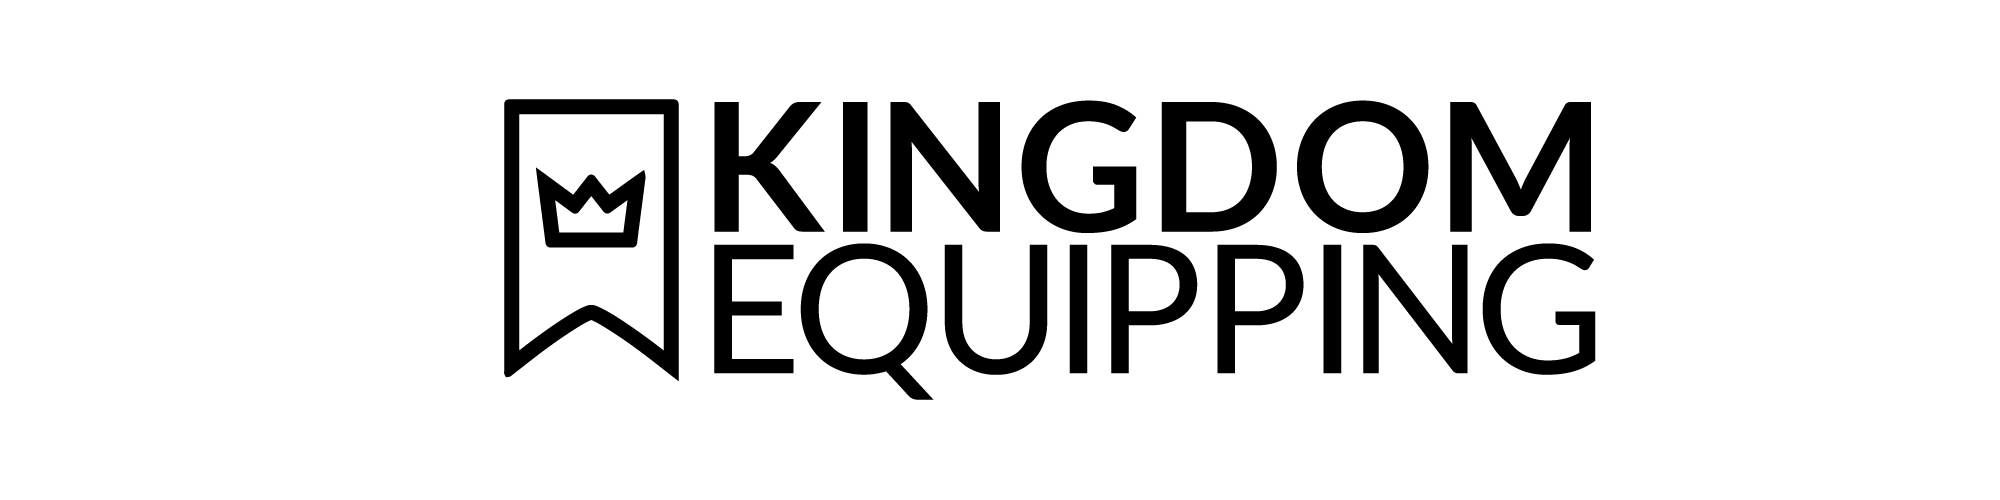 Power and Identity Session 1 | Kingdom Equipping